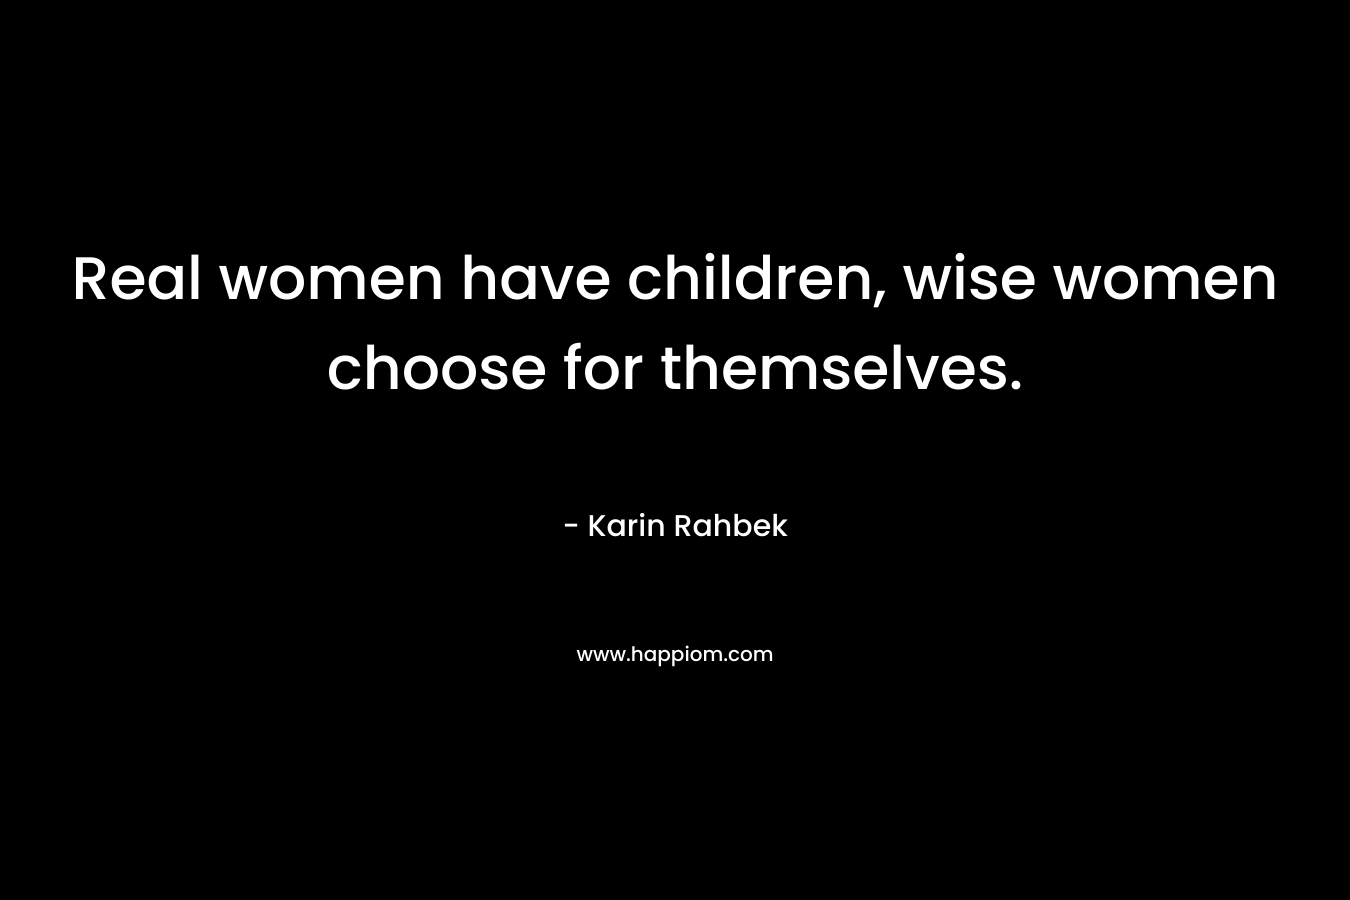 Real women have children, wise women choose for themselves.